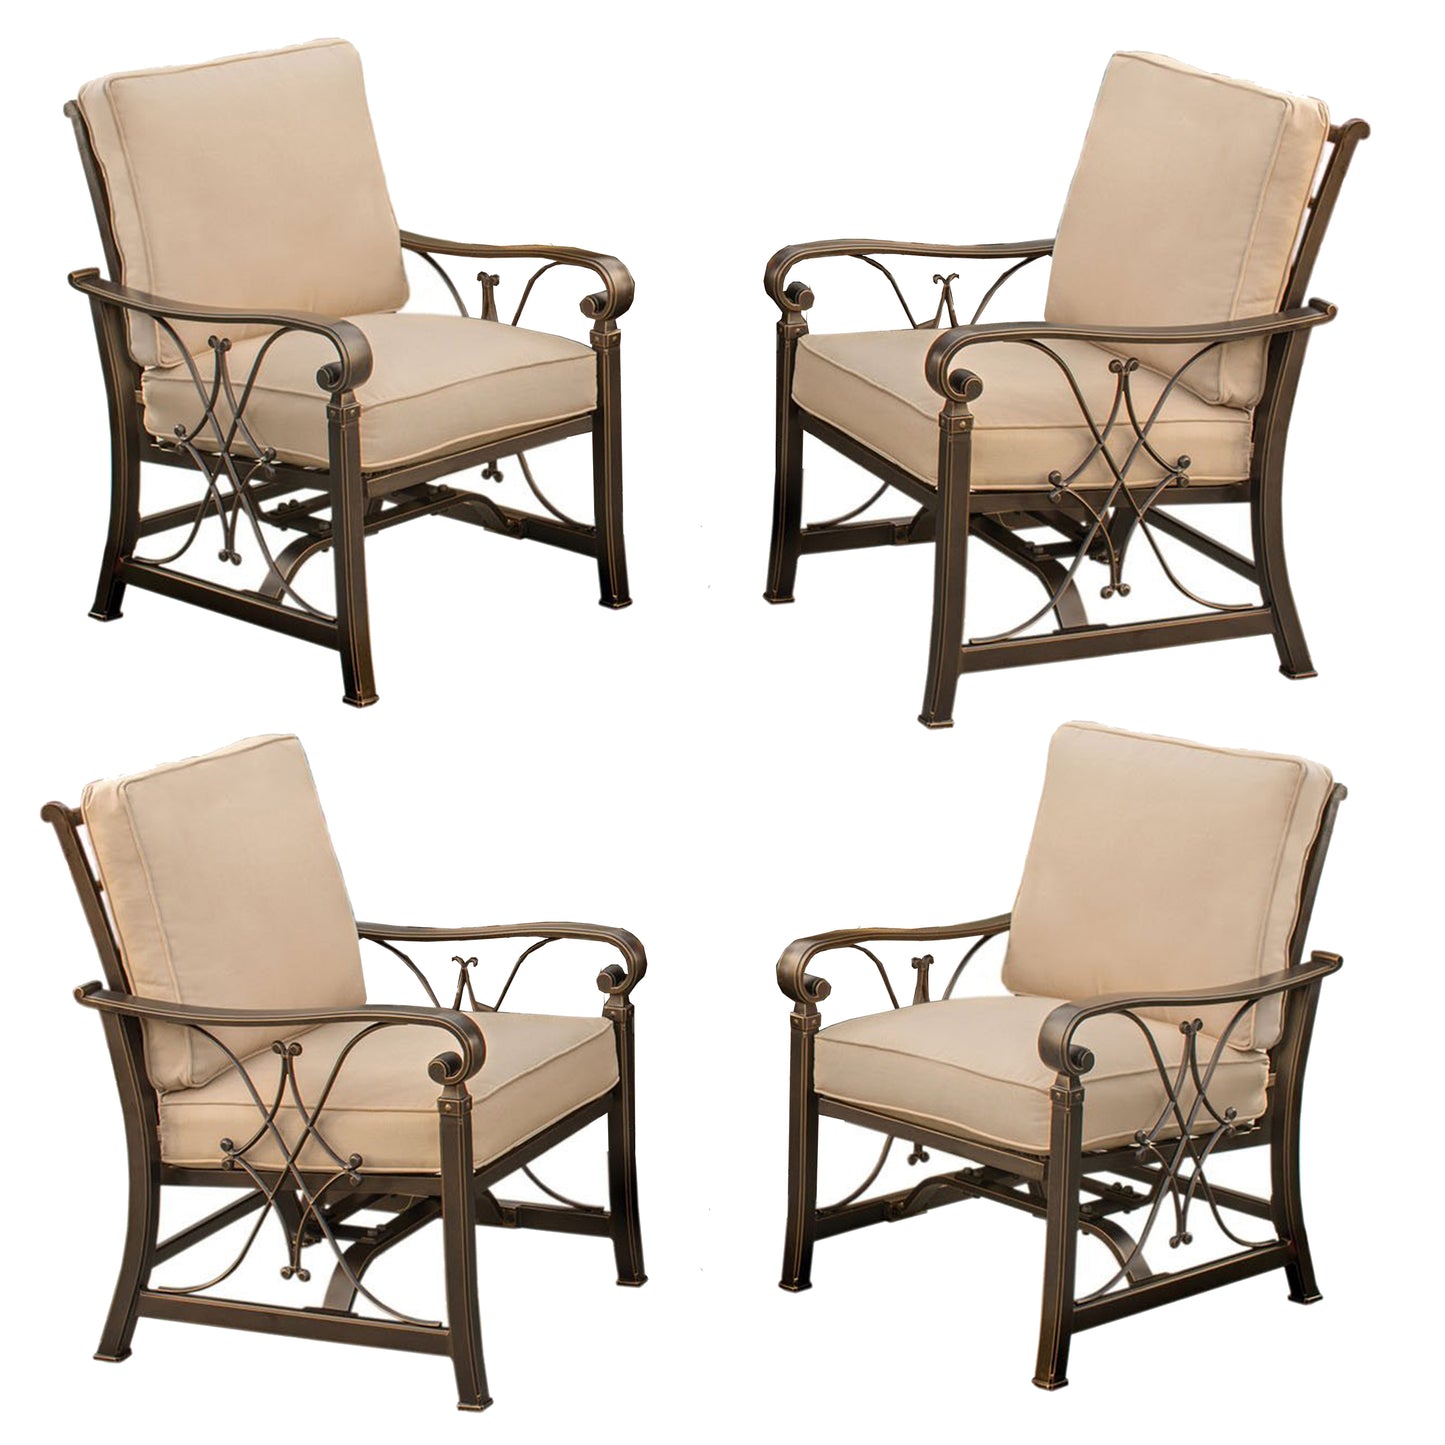 Aluminum Deep Seating Rocking Club Chairs in Antique Copper (set of 4)